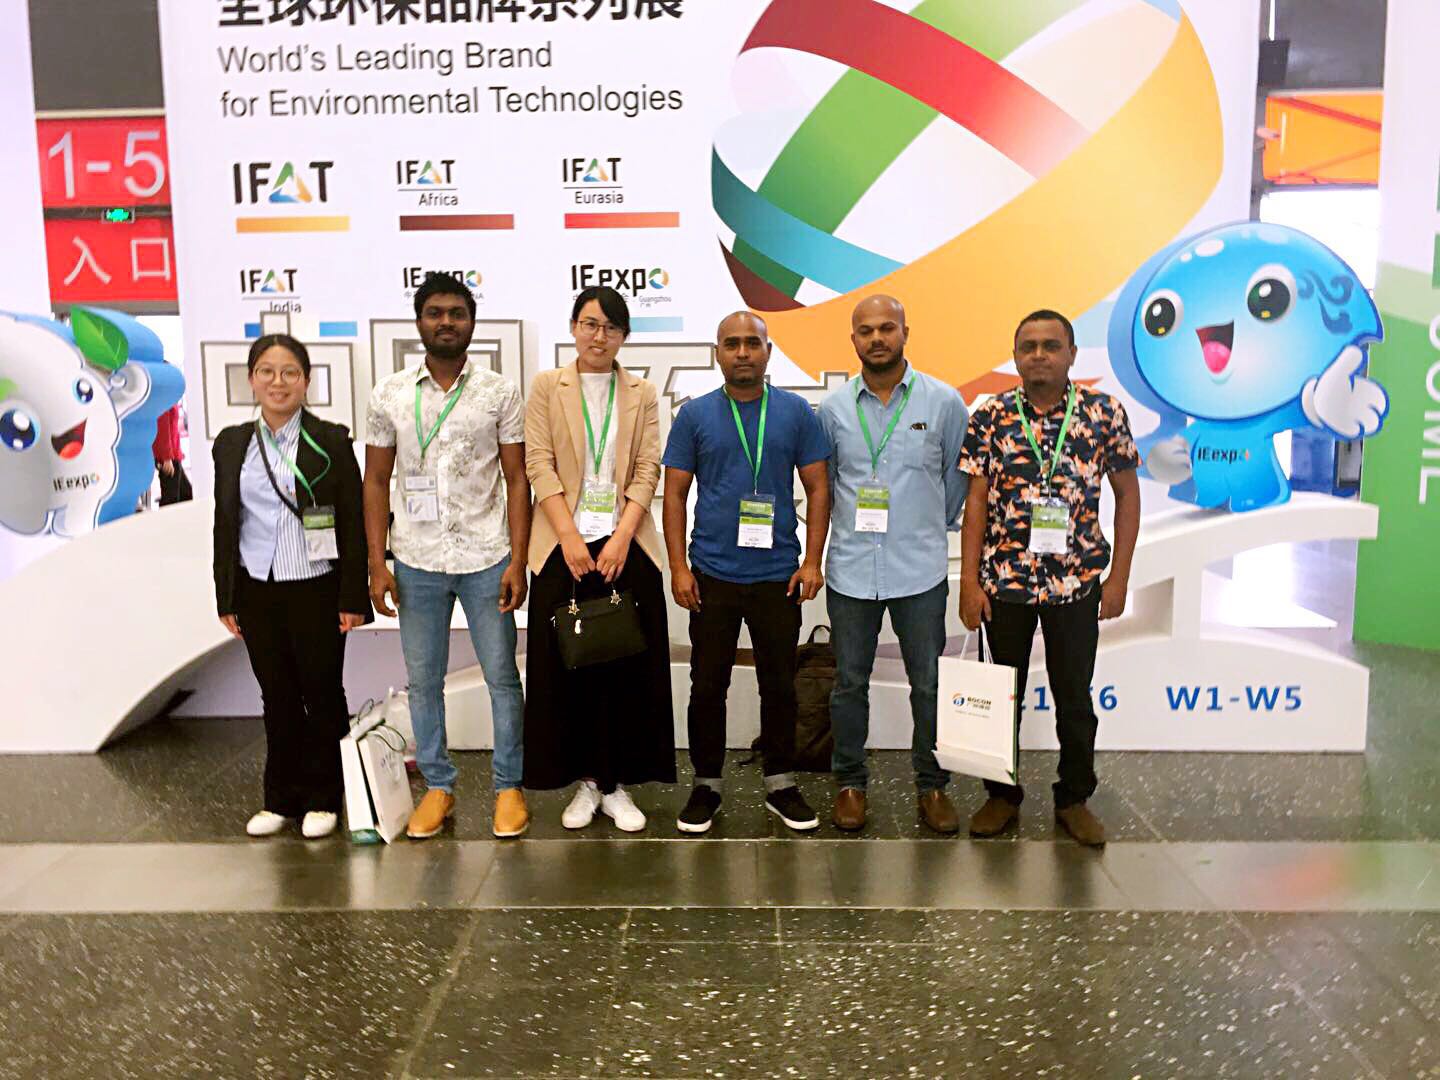 IE expo China 2018 is held in the Shanghai New International Expo Centre (SNIEC) from May 3 to 5